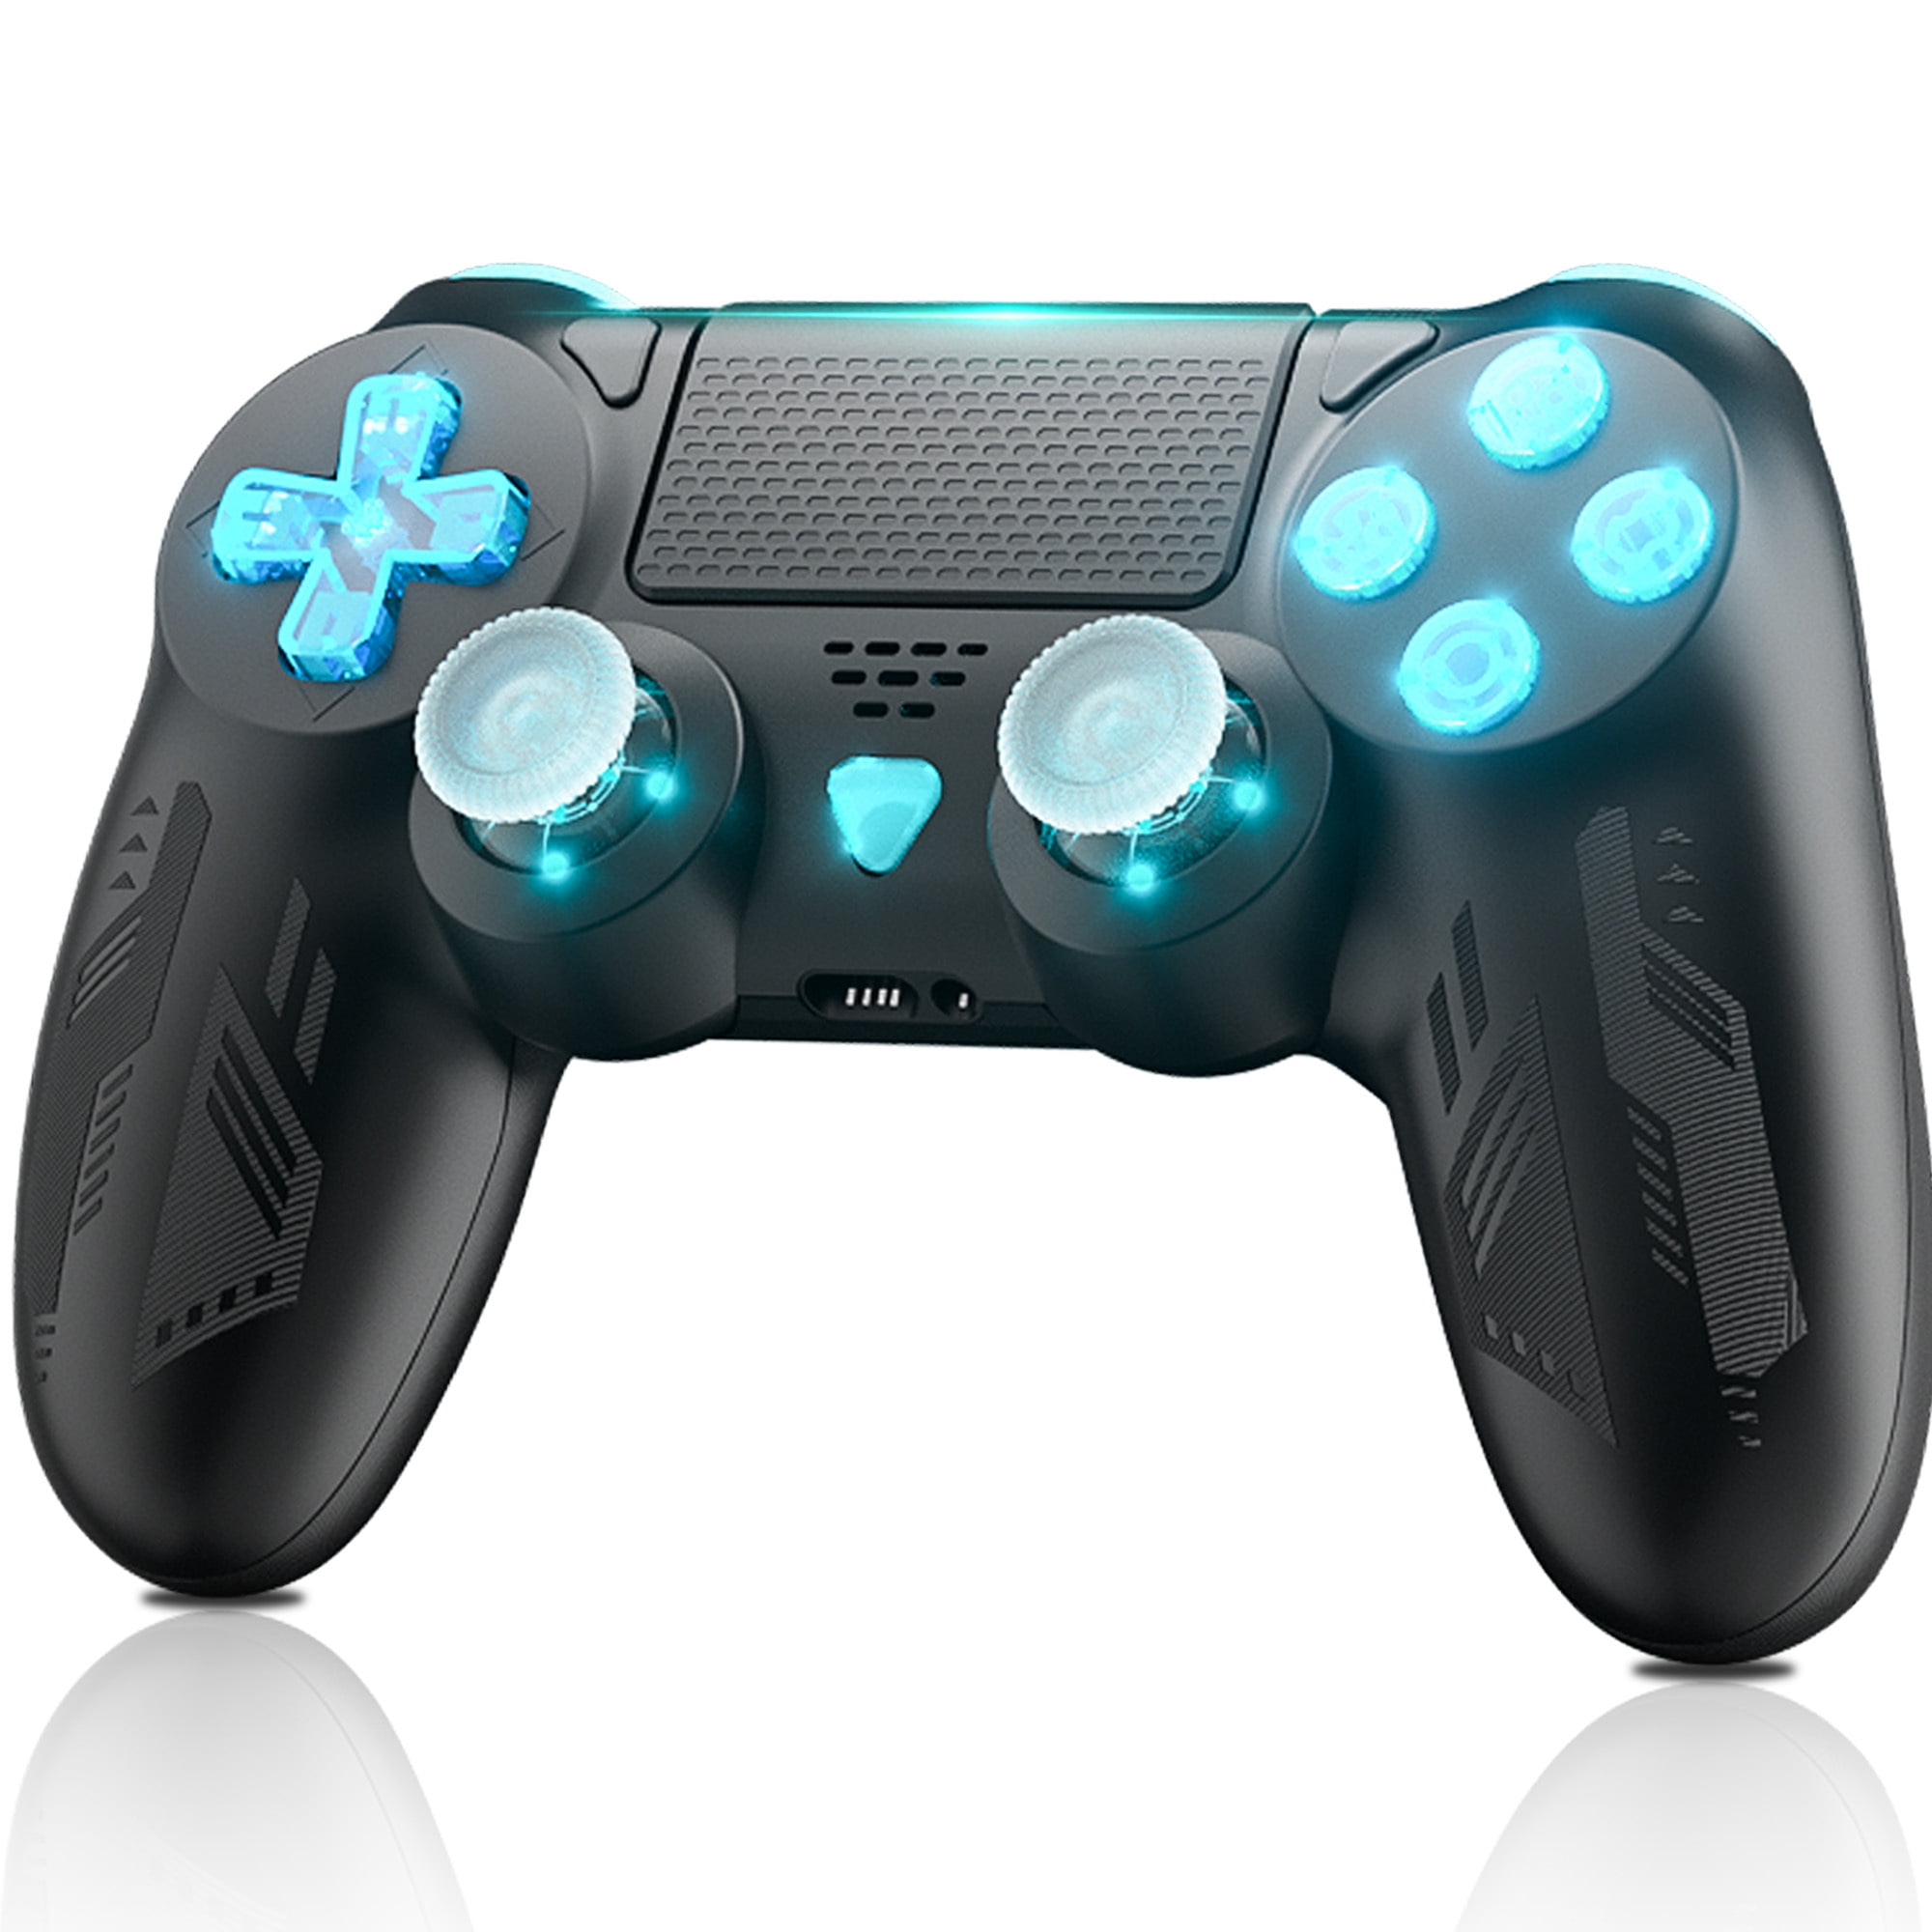 vægt Tolk dyr Bonadget Wireless Controller for PS4,with Custom LED Light - Compatible  with Playstation 4/Slim/Pro, for Remote Joystick Ps4 Support Turbo/Dual  Vibration/6-Axis Motion Sensor/ Touch Pad - Walmart.com